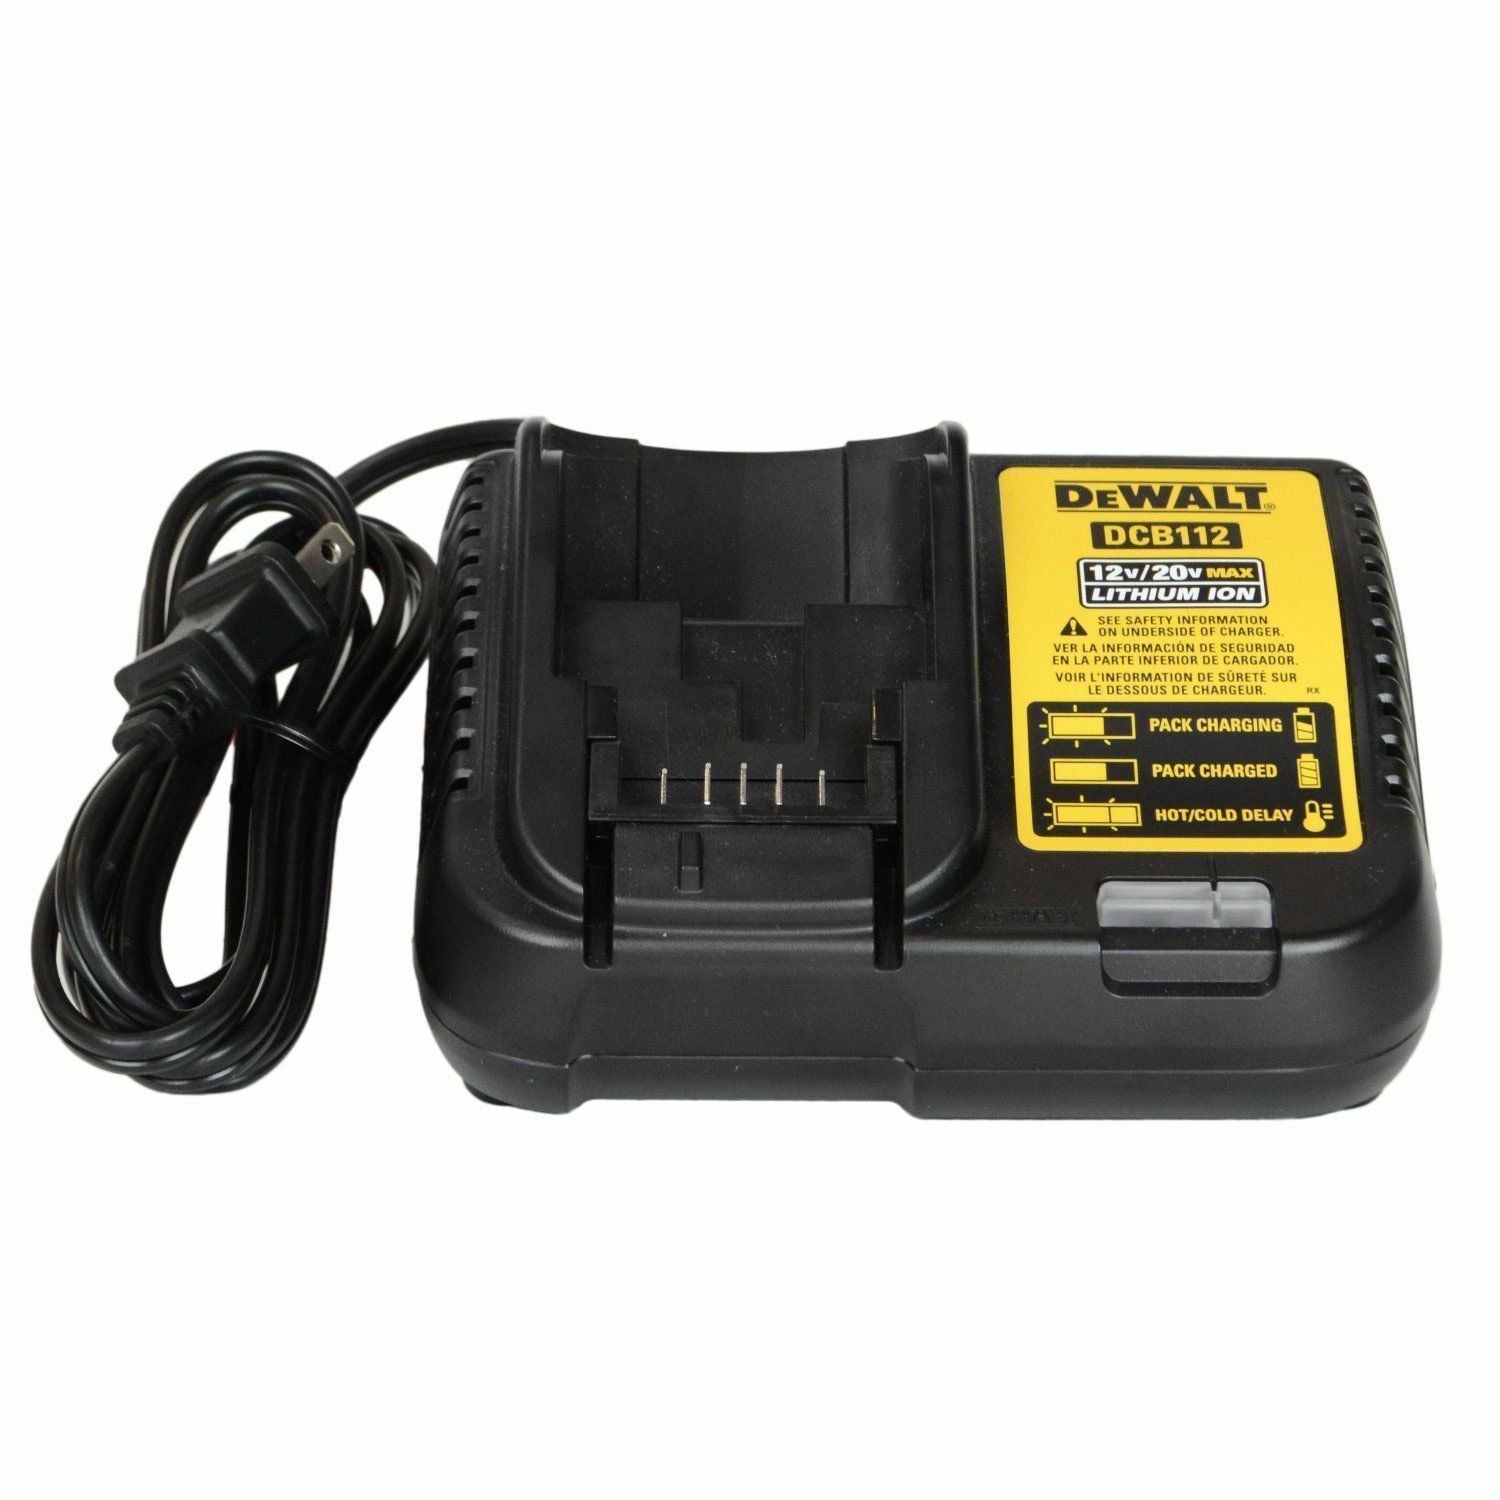 Barcelona Rationel Personlig Dewalt 12-Volt to 20-Volt Lithium-Ion Battery Charger – JATComm Tools and  Accessories